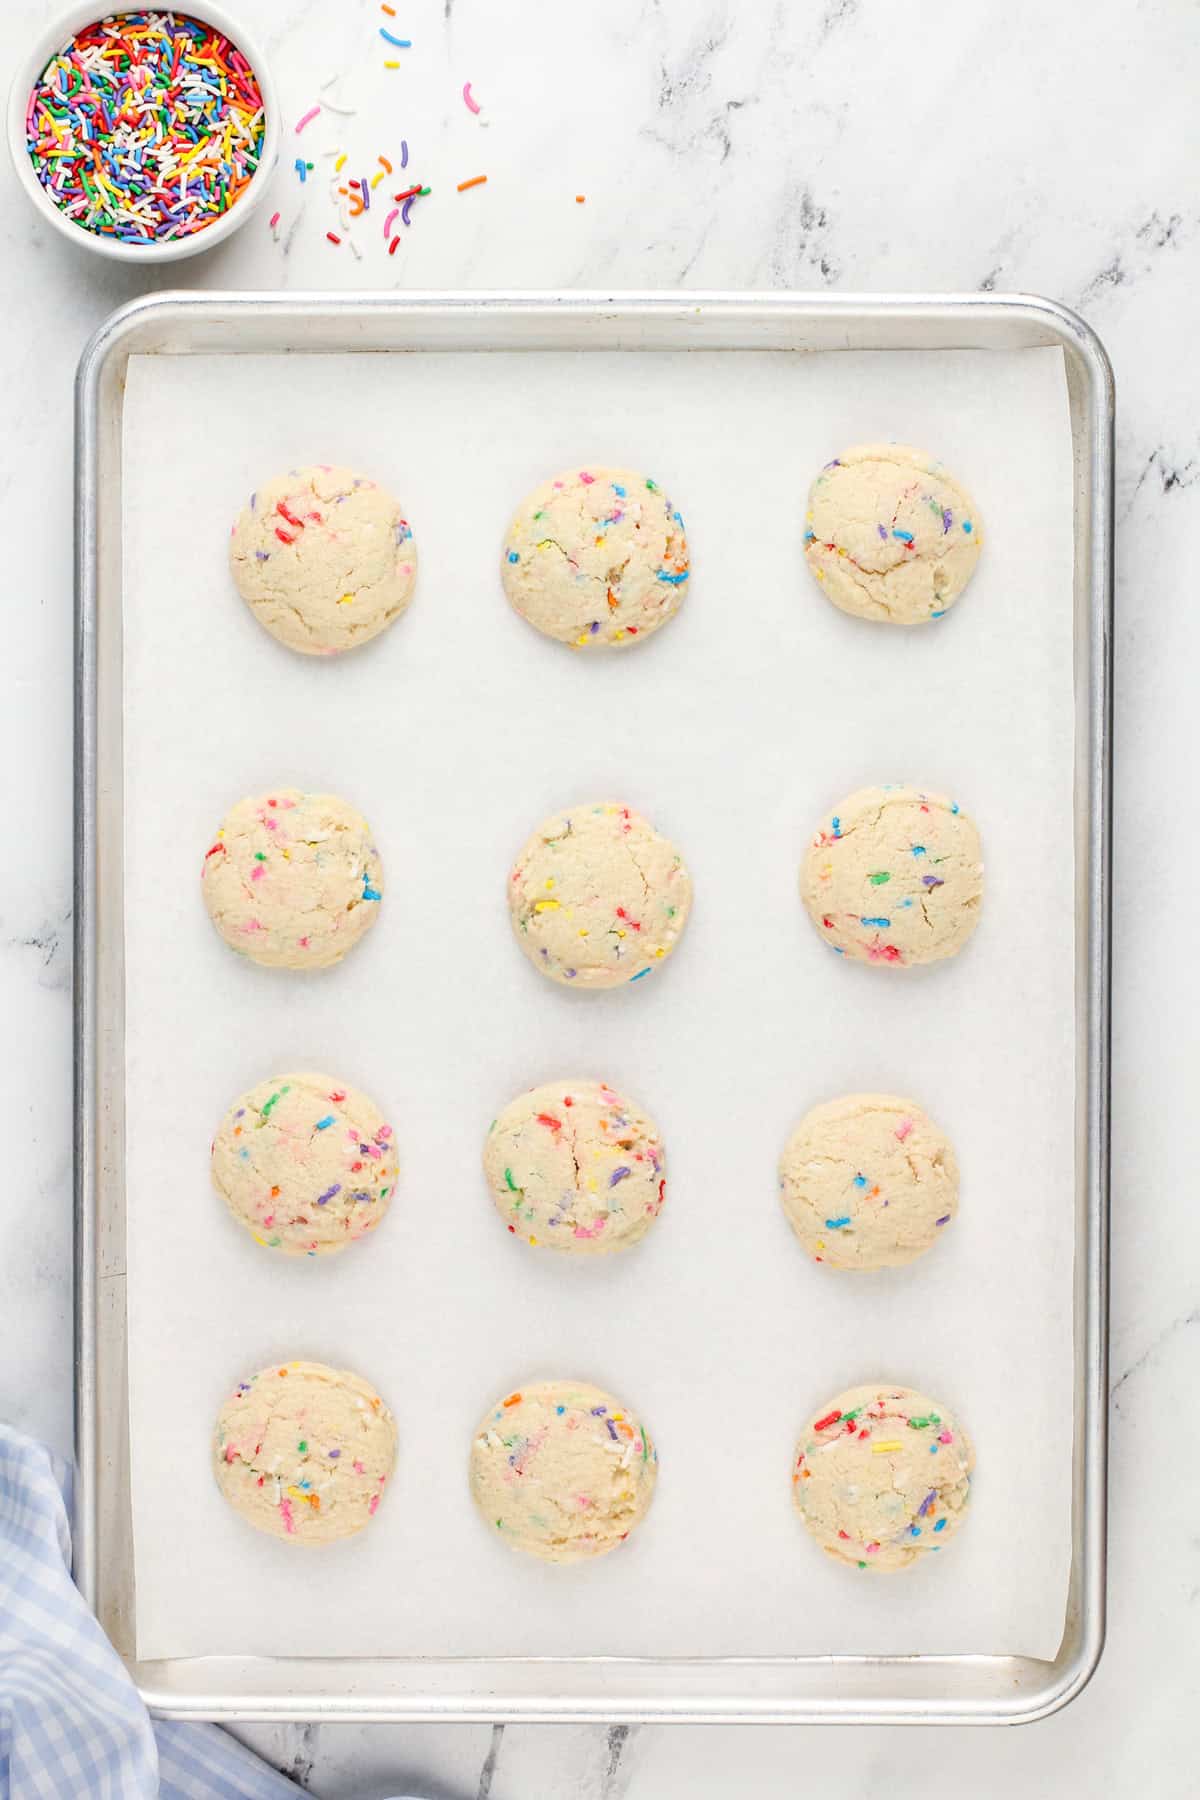 Baked birthday cake cookies on a lined baking sheet.